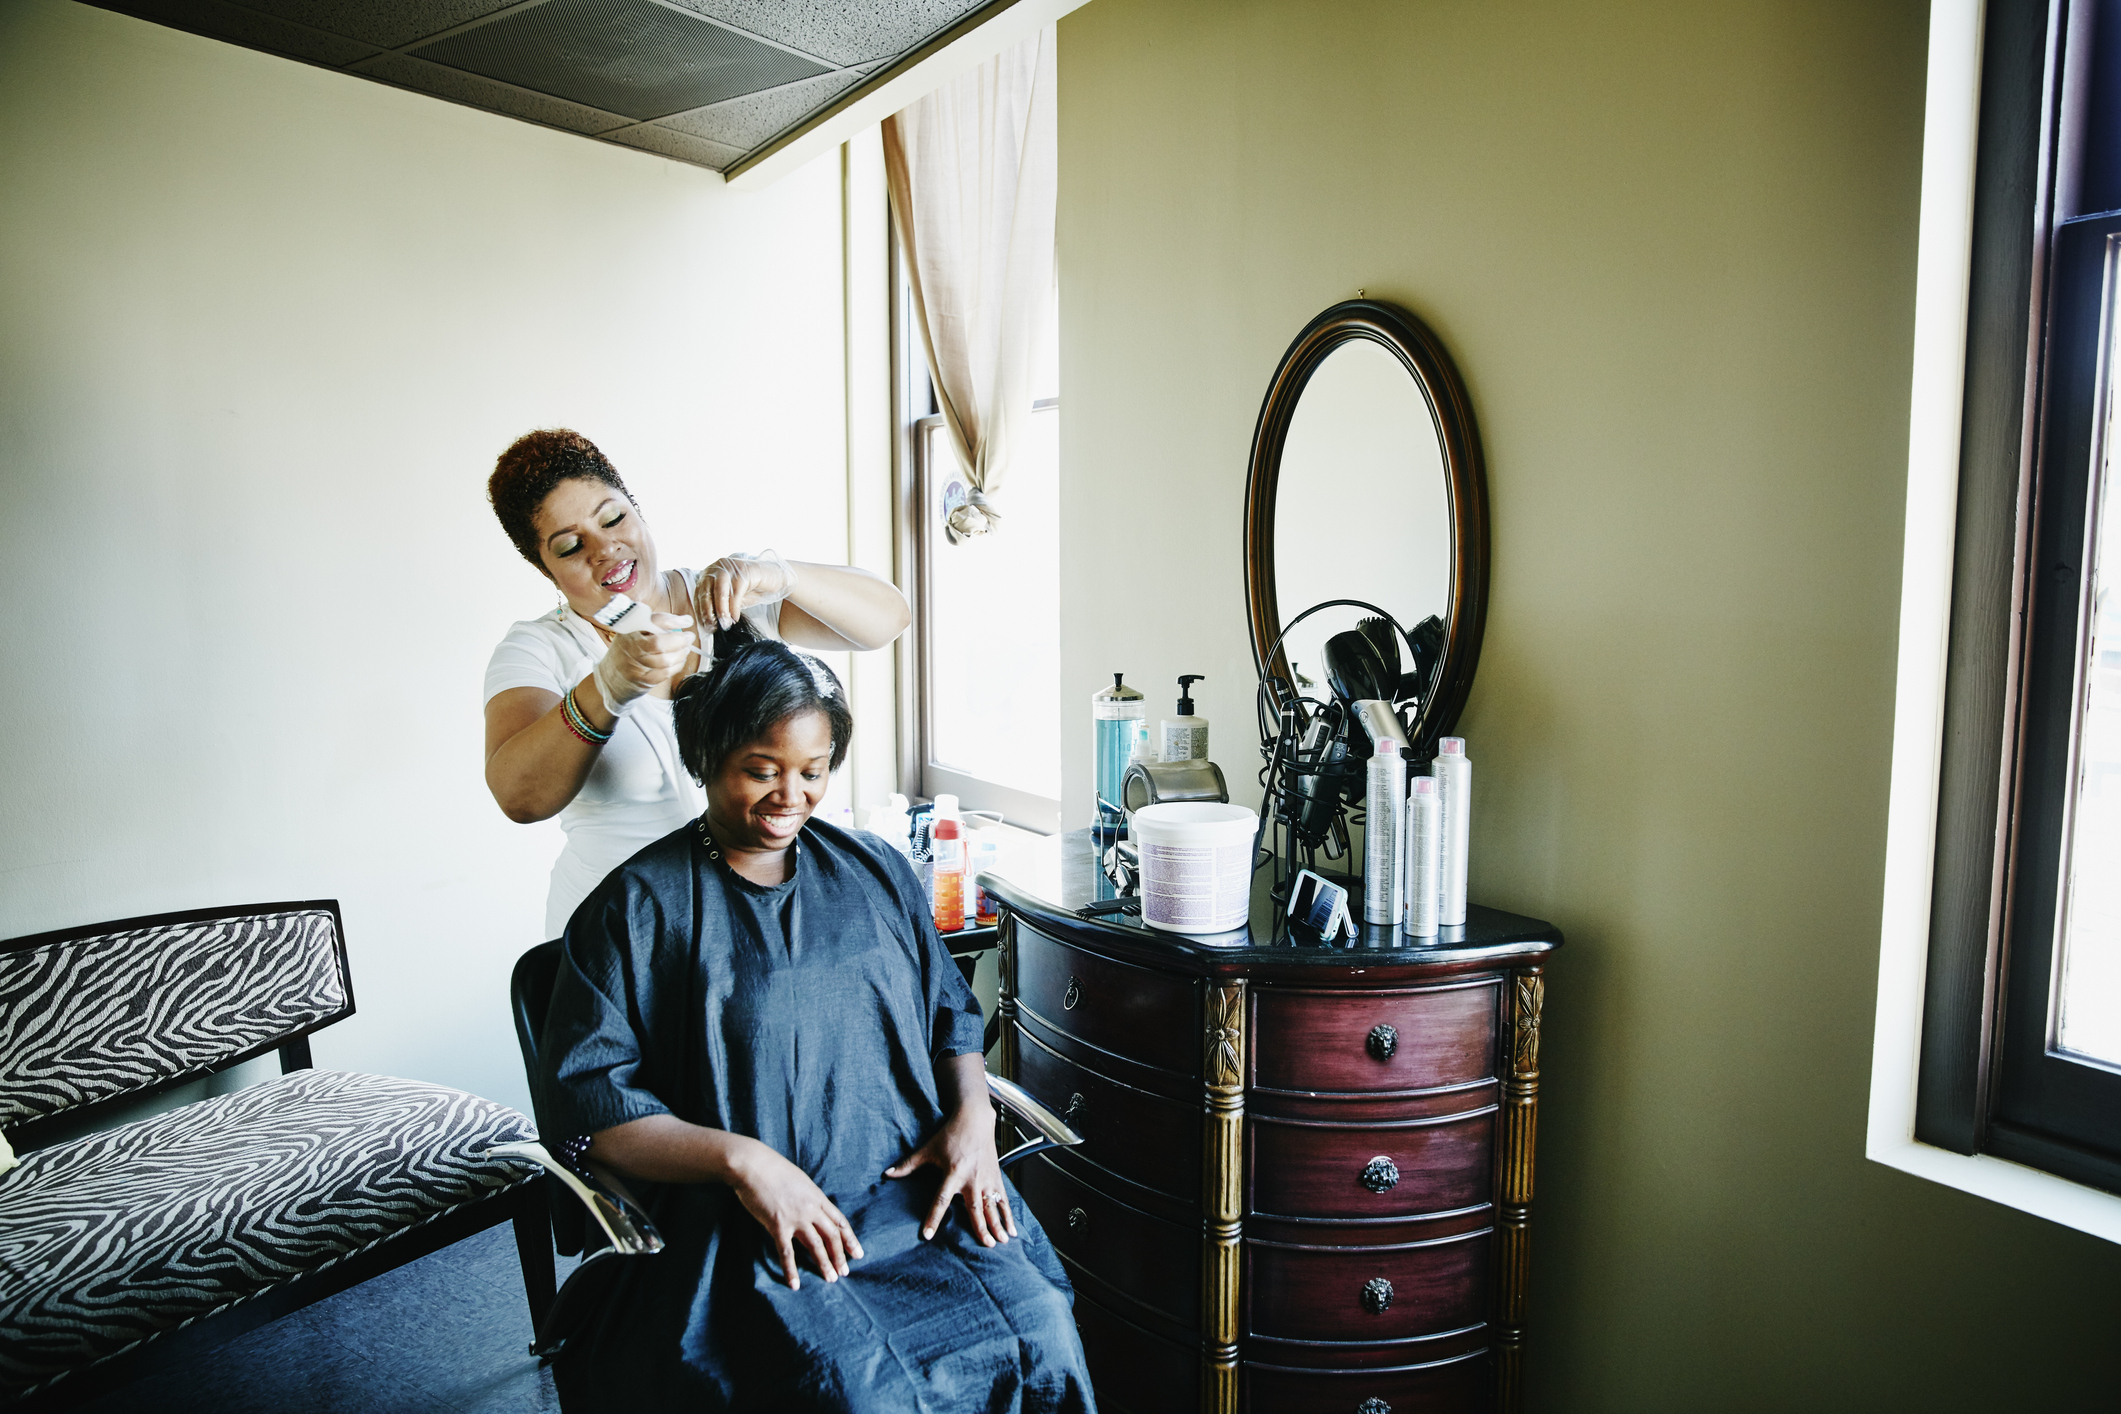 Hairdresser working on a client&#x27;s hair in a salon setting